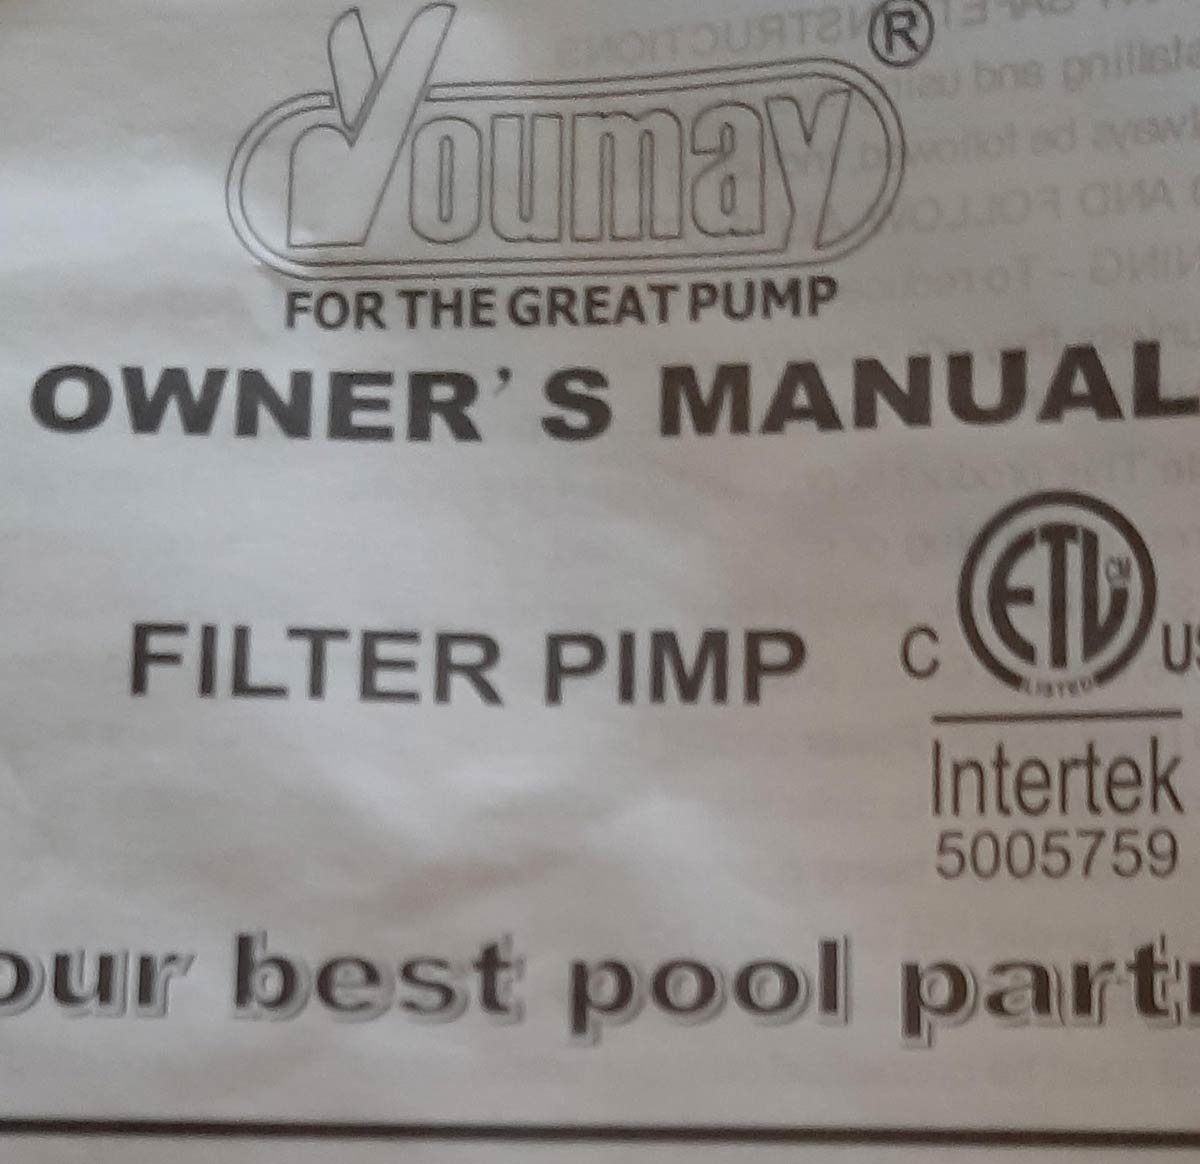 After installing my new pool pump, you may now refer to me by my new title..